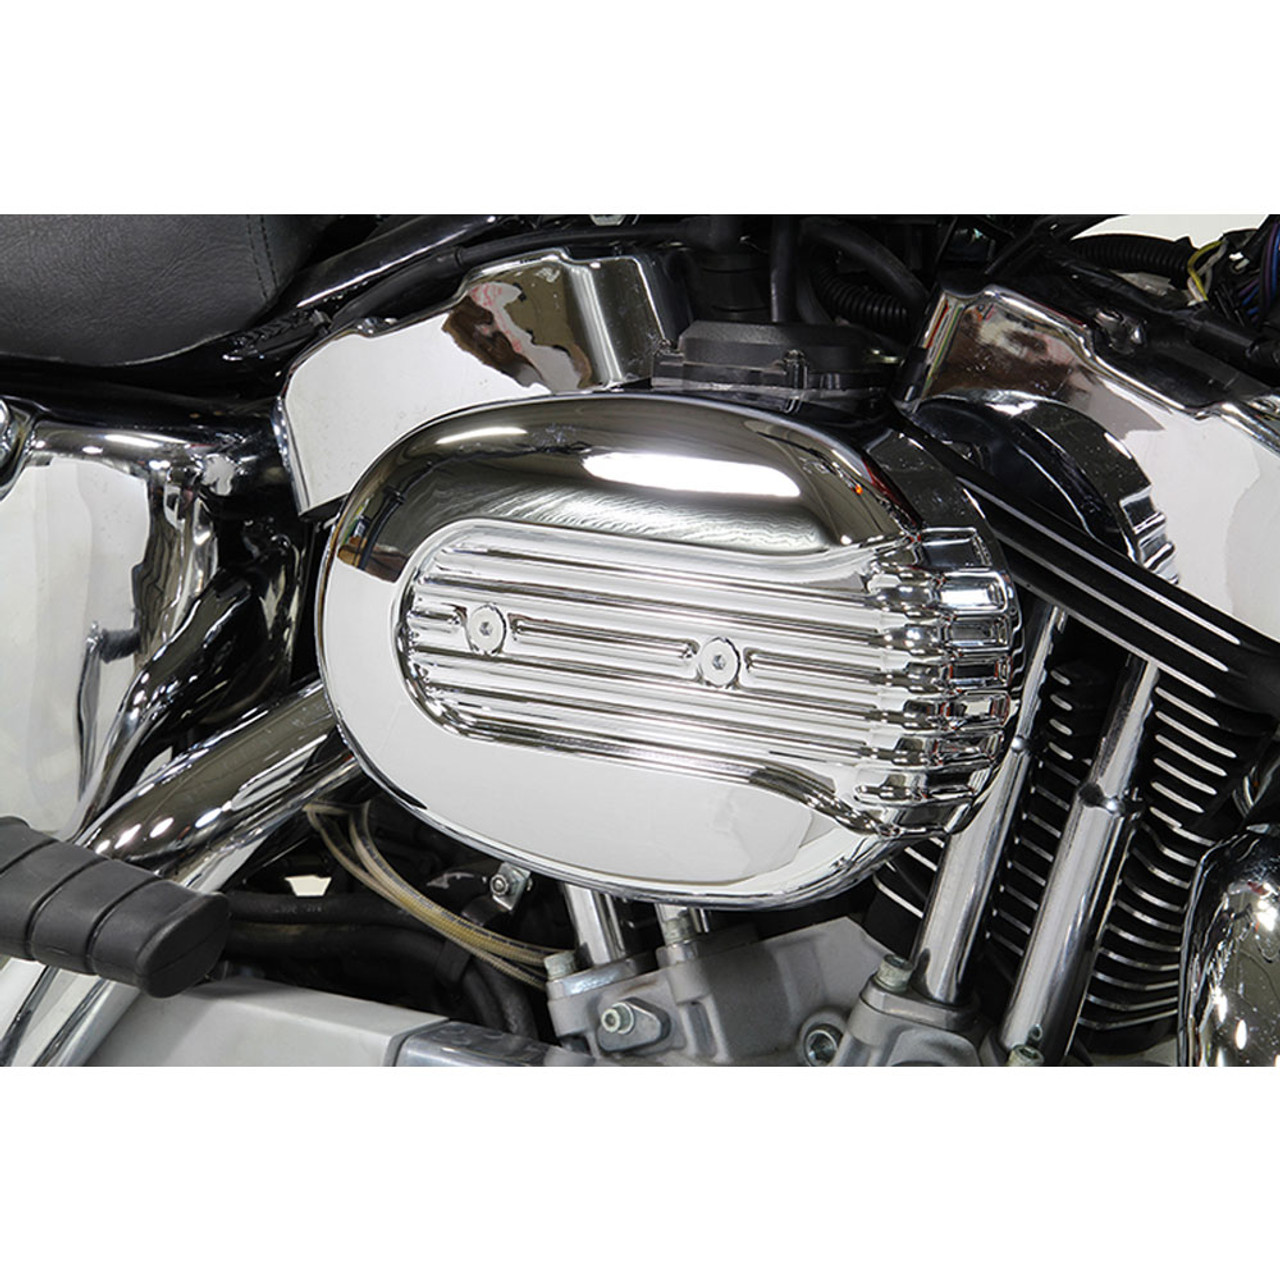 https://cdn11.bigcommerce.com/s-5m0fr/images/stencil/1280x1280/products/4961/36414/v-twin_air_cleaner_harley_sportster_chrome_oval_late_style_34-1693d__81516.1462982252.jpg?c=2?imbypass=on